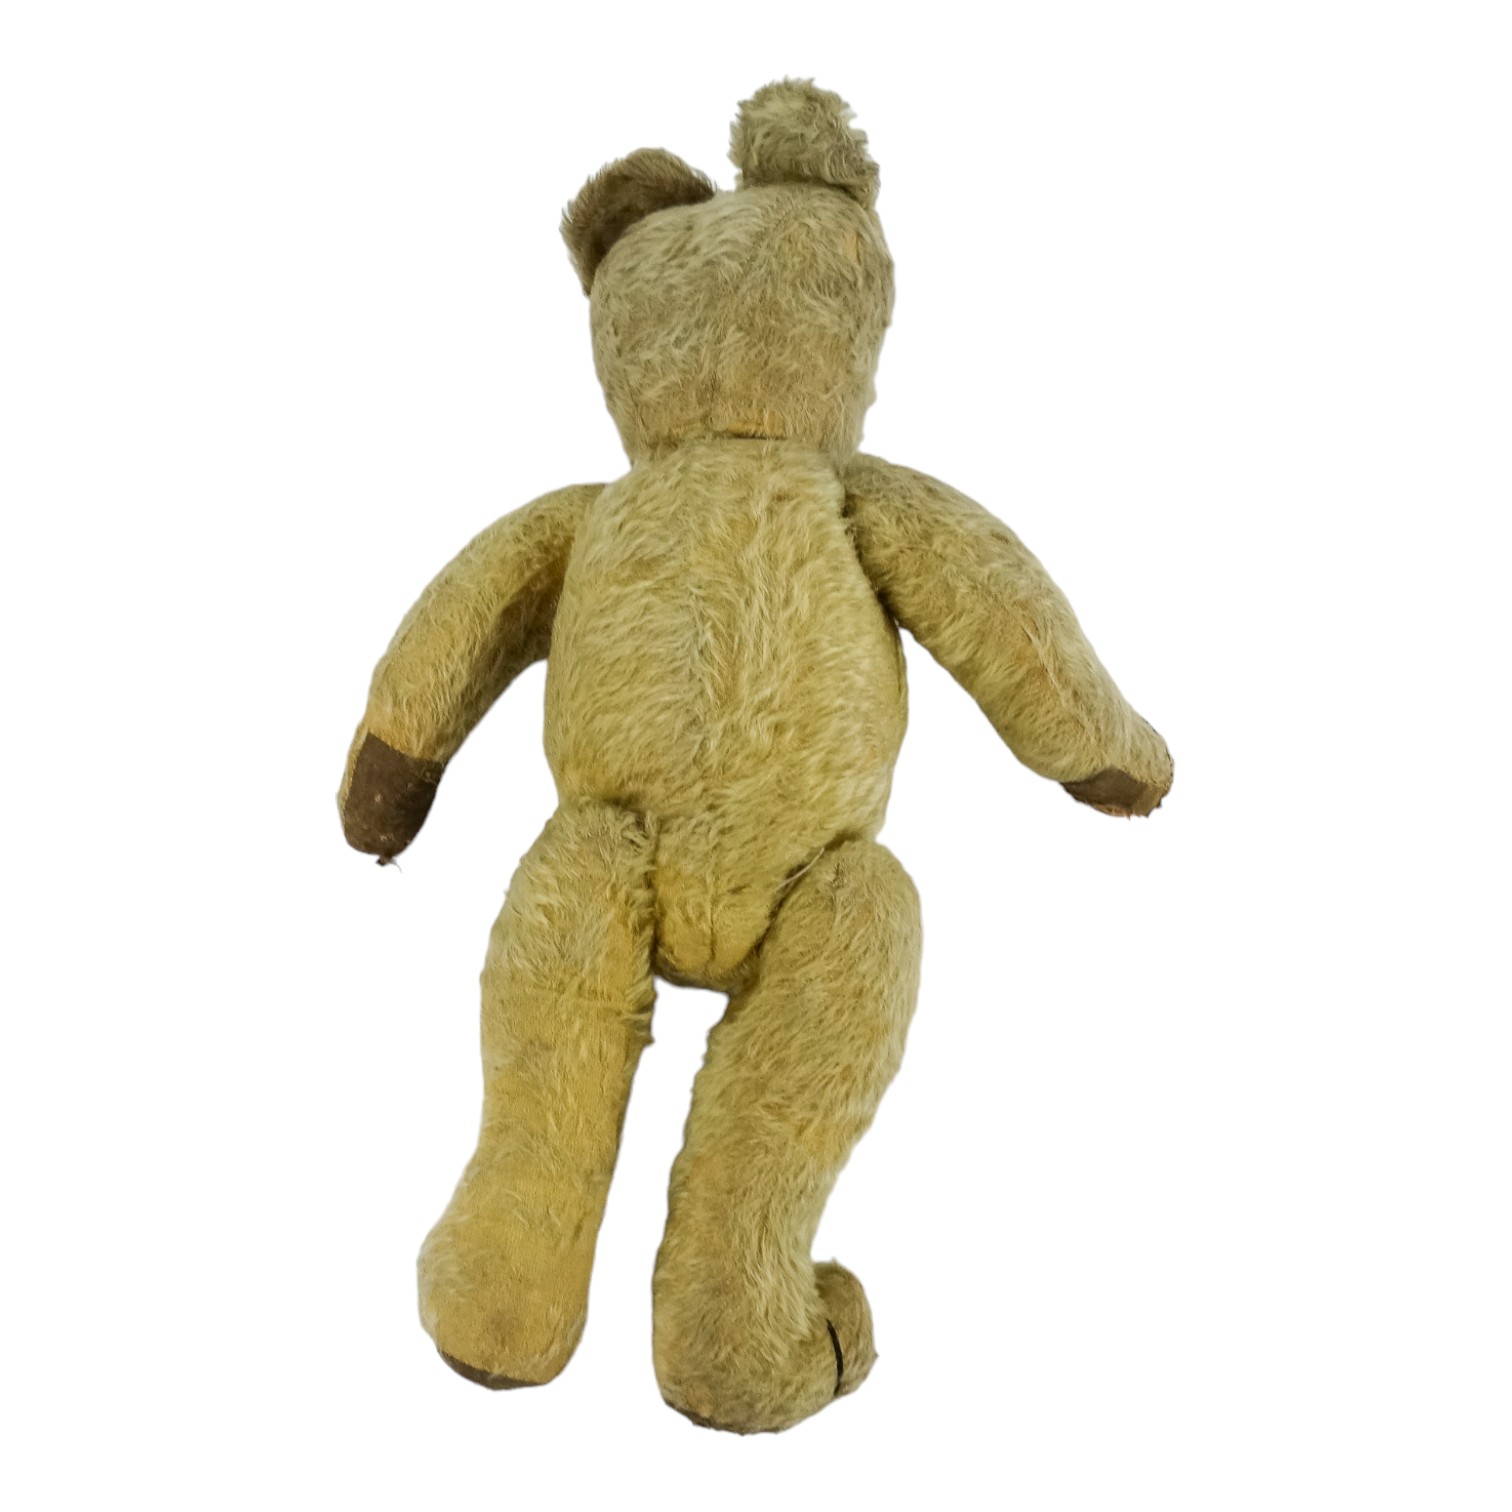 An early 20th century teddy bear - gold plush with articulated limbs, pad paws, stitched features - Image 6 of 6